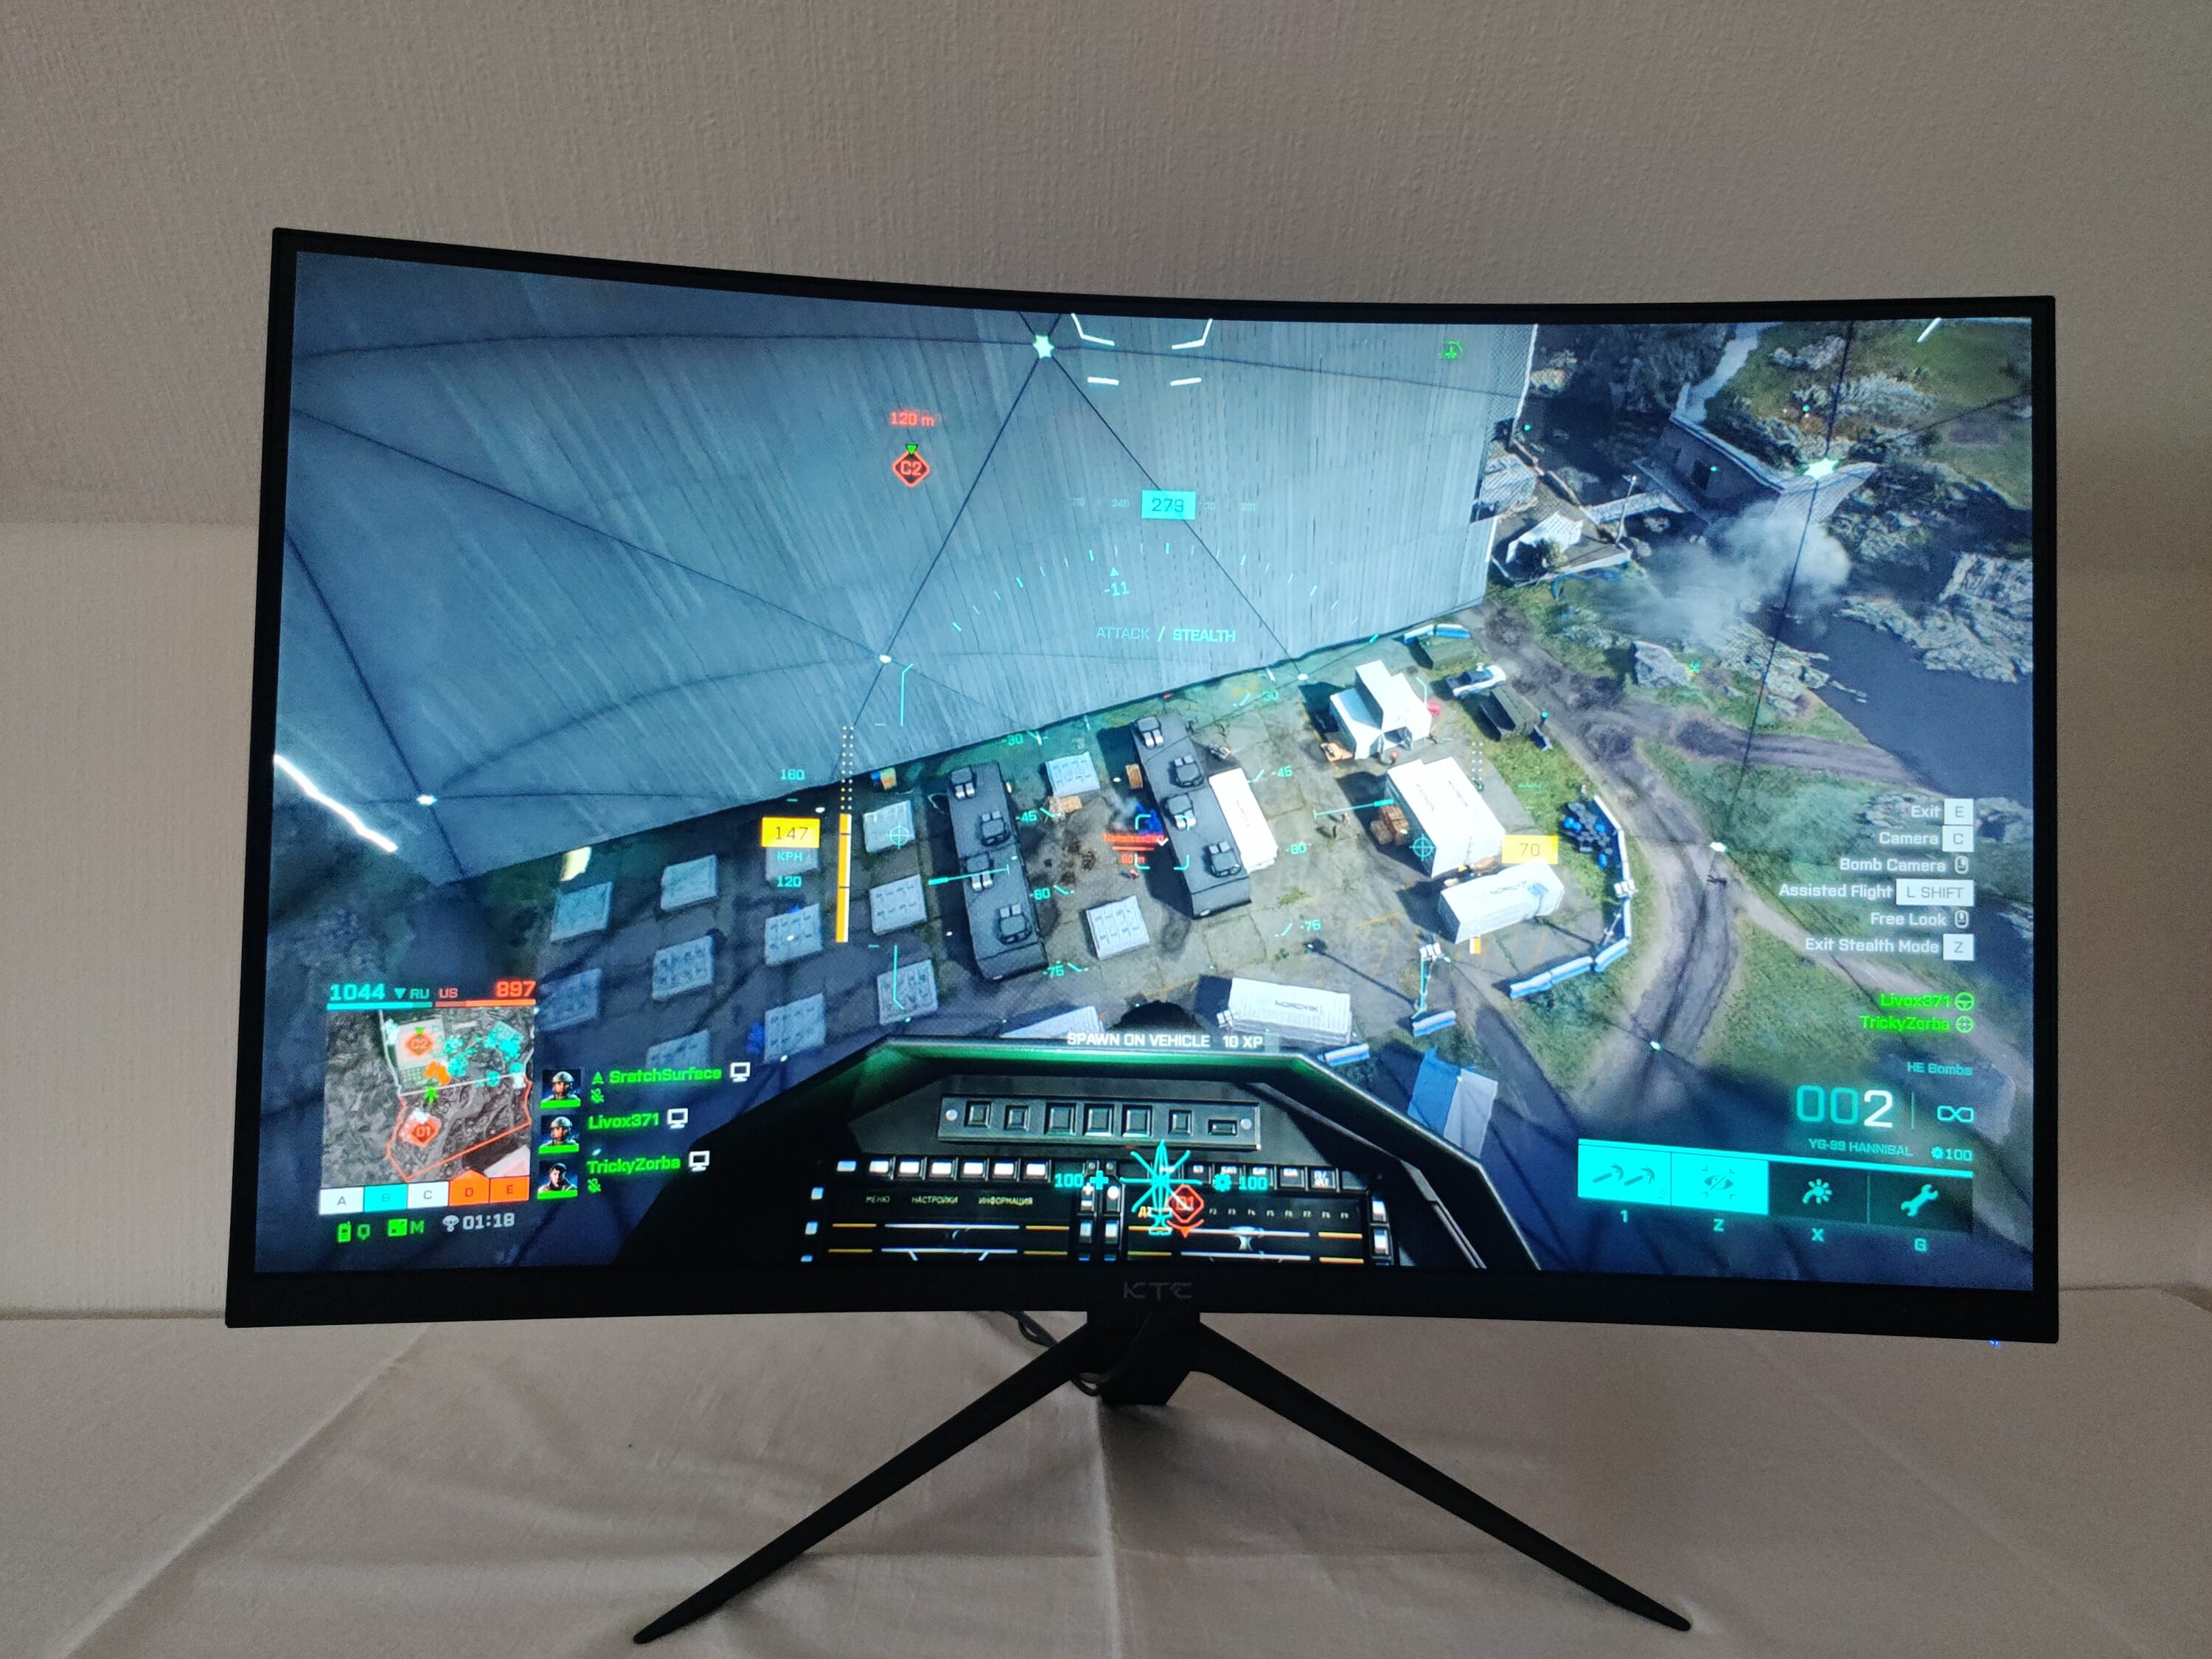 KTC H32S17 in review: An immersive gaming experience?